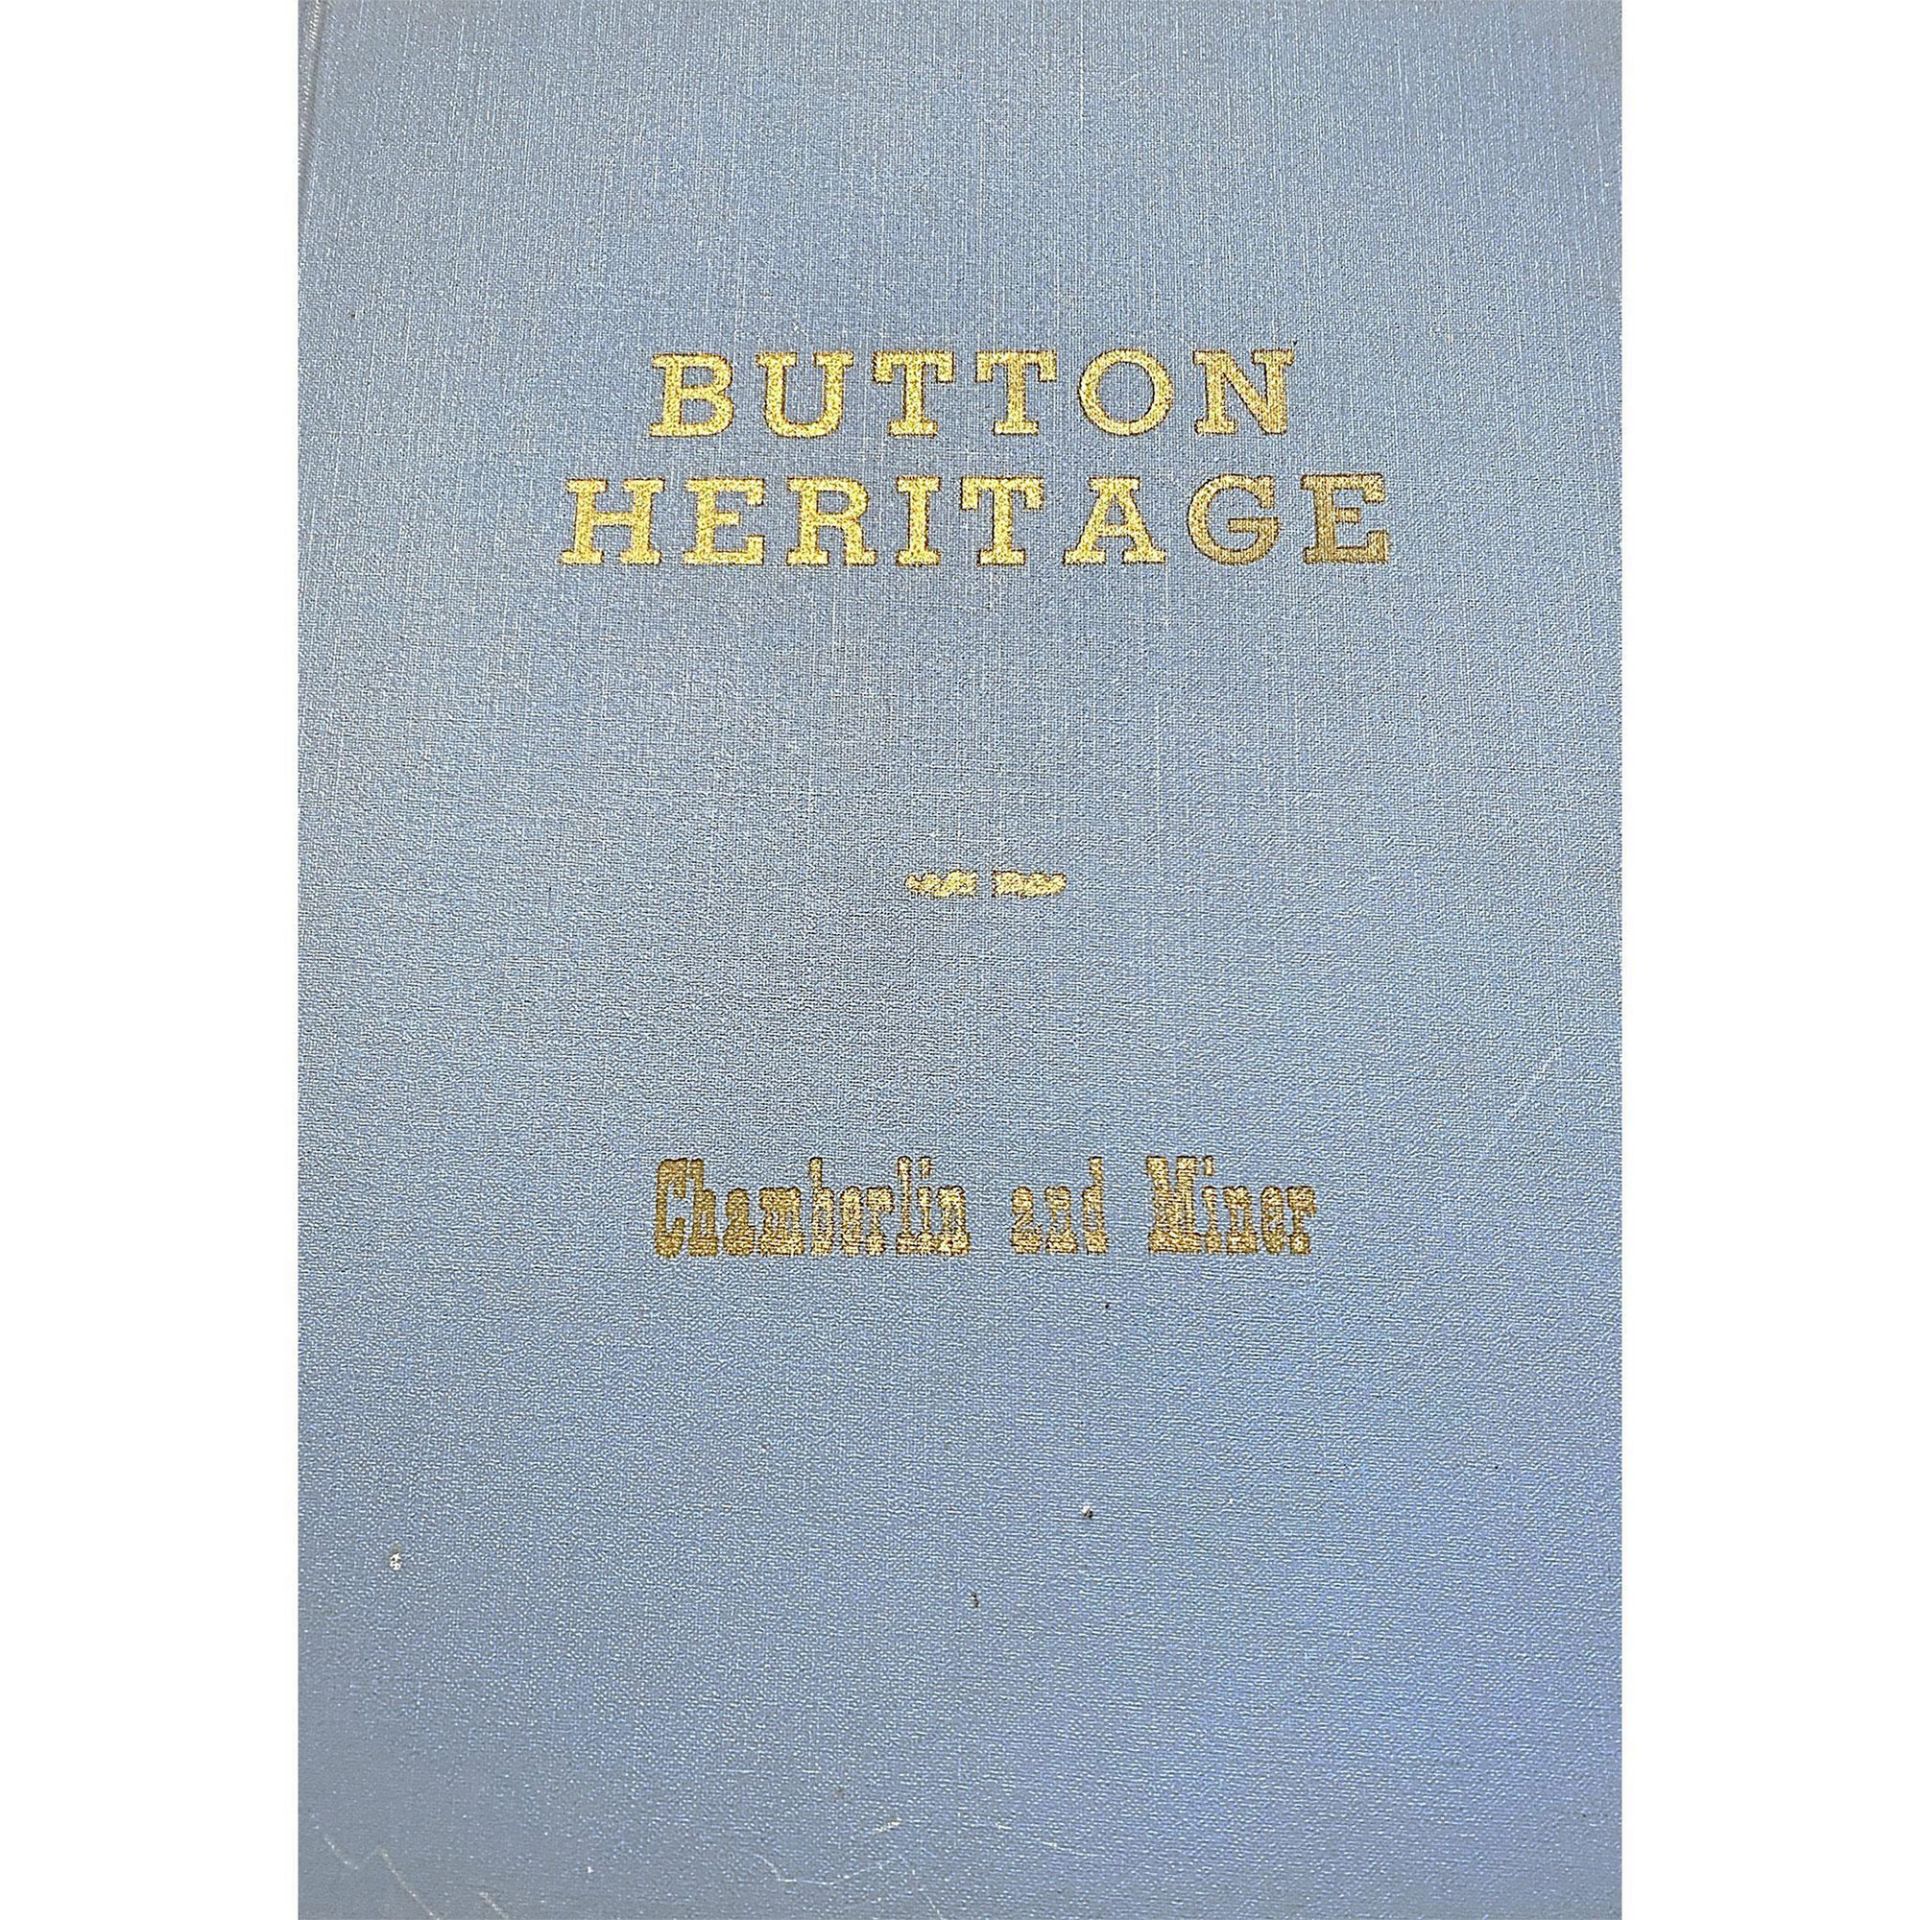 A Group of Books About Buttons - Image 2 of 3